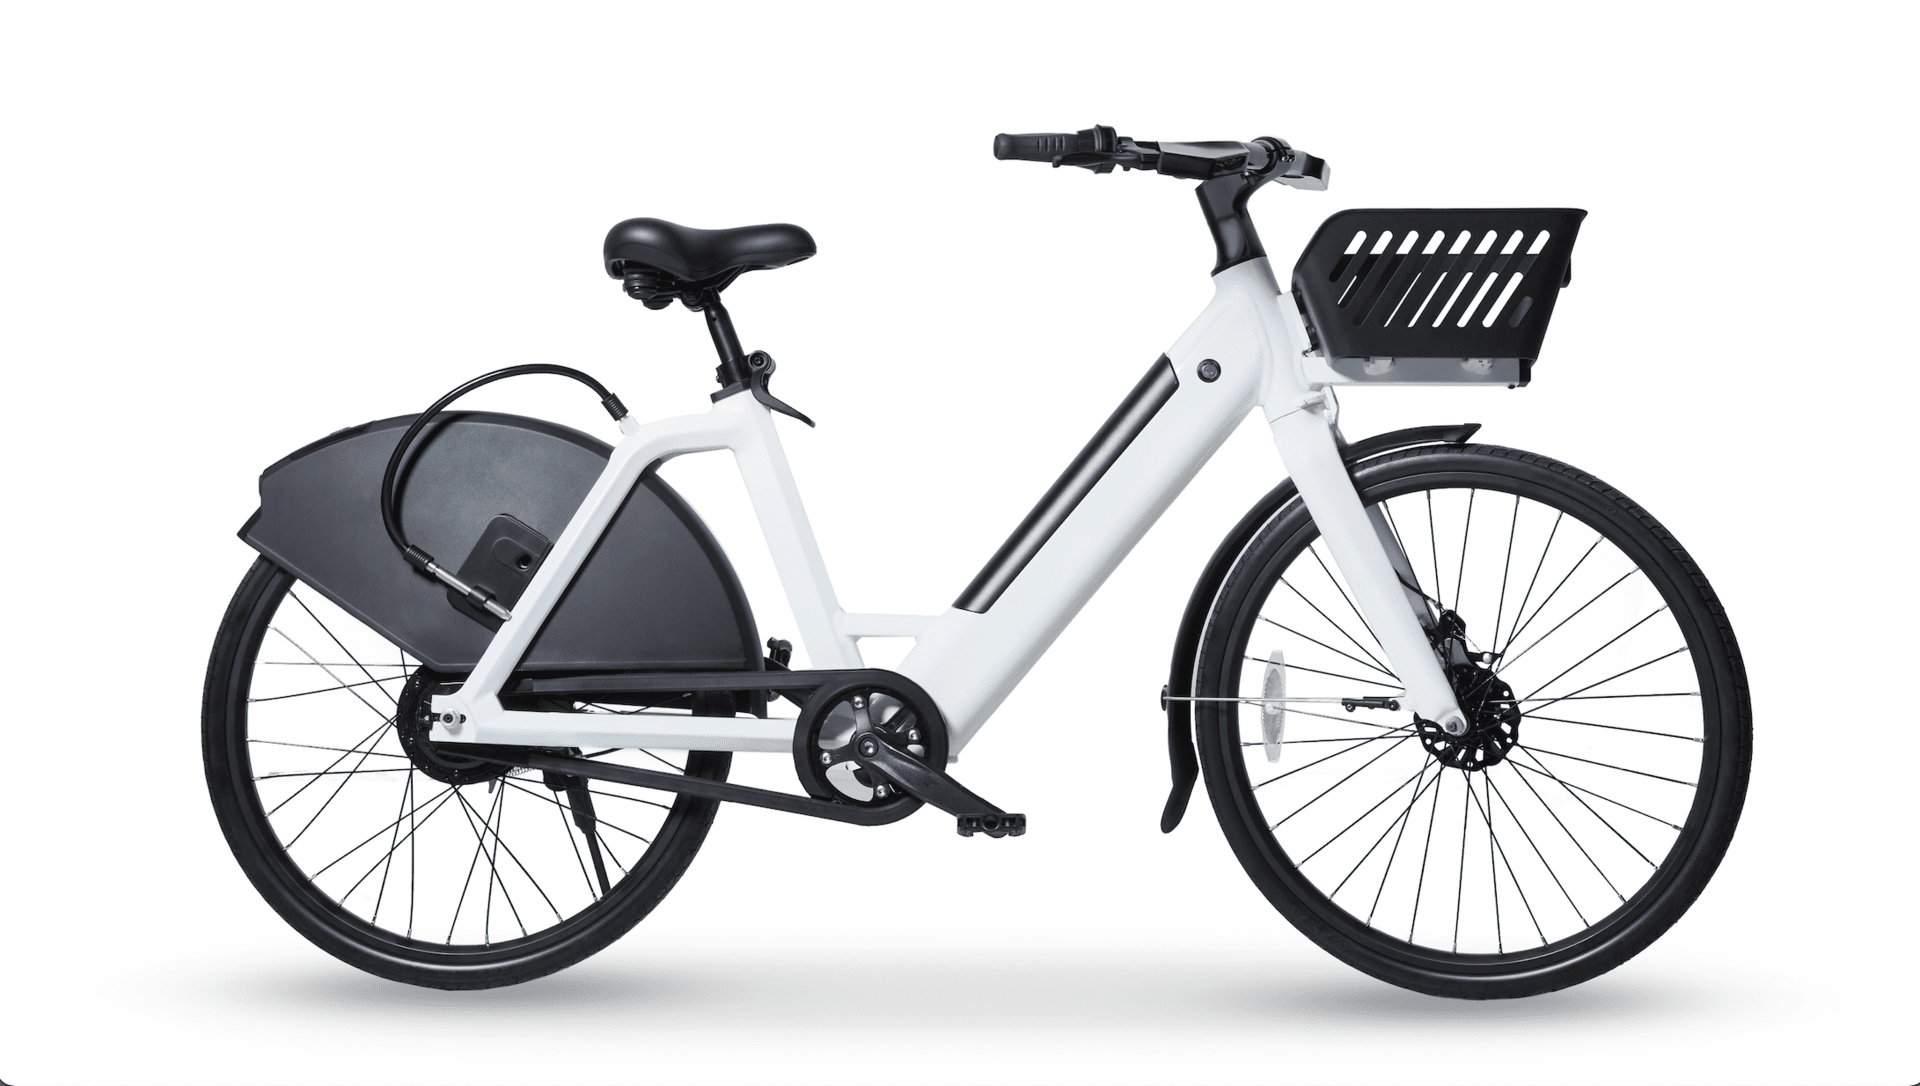 The WD150 co-developed e-bike with a white background display.